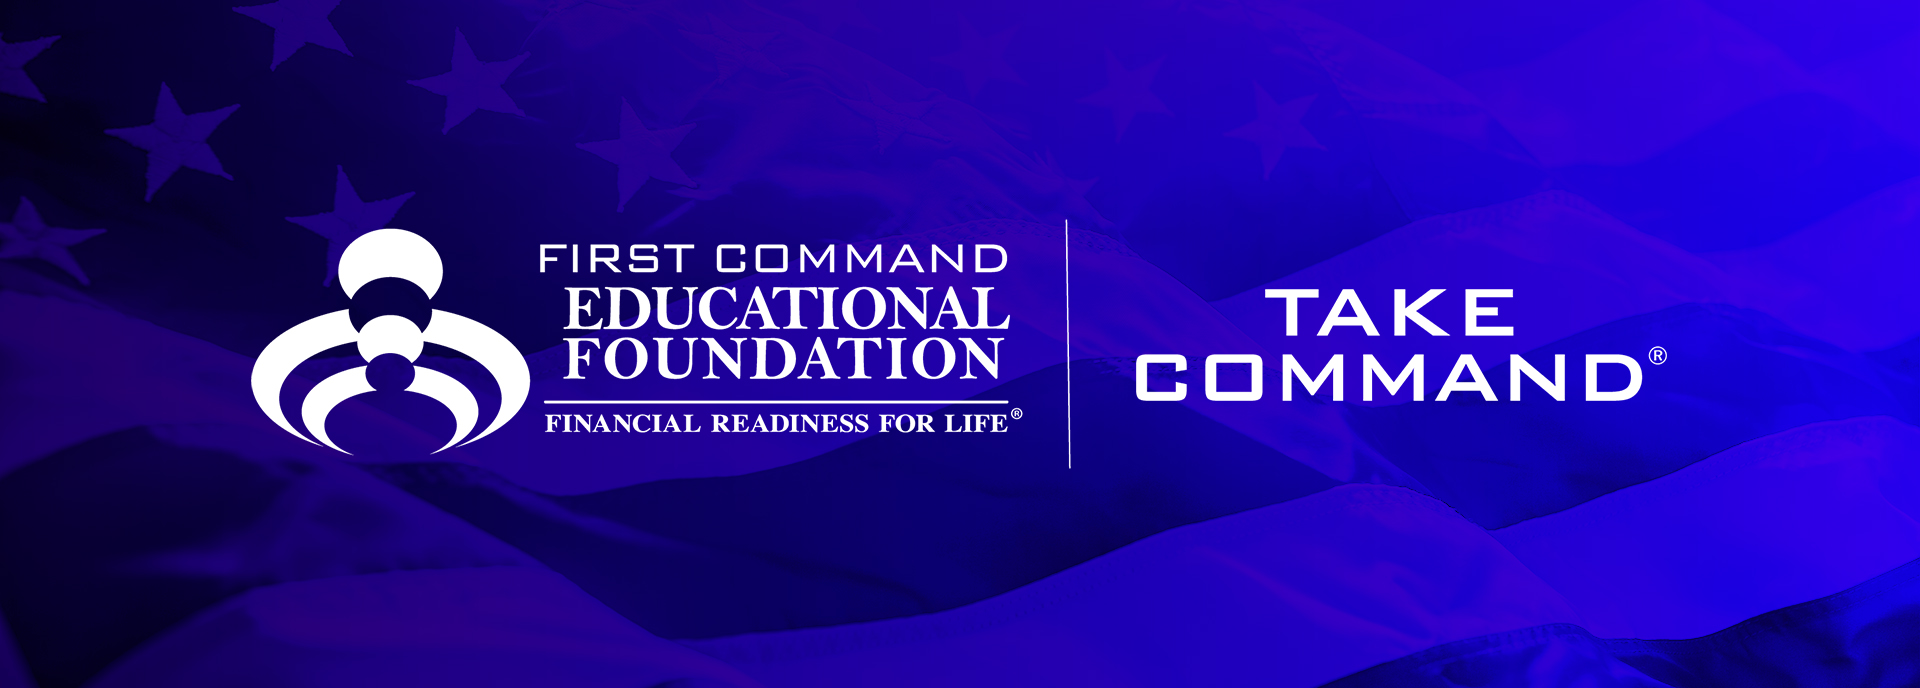 First Command Educational Foundation Take Command Logo